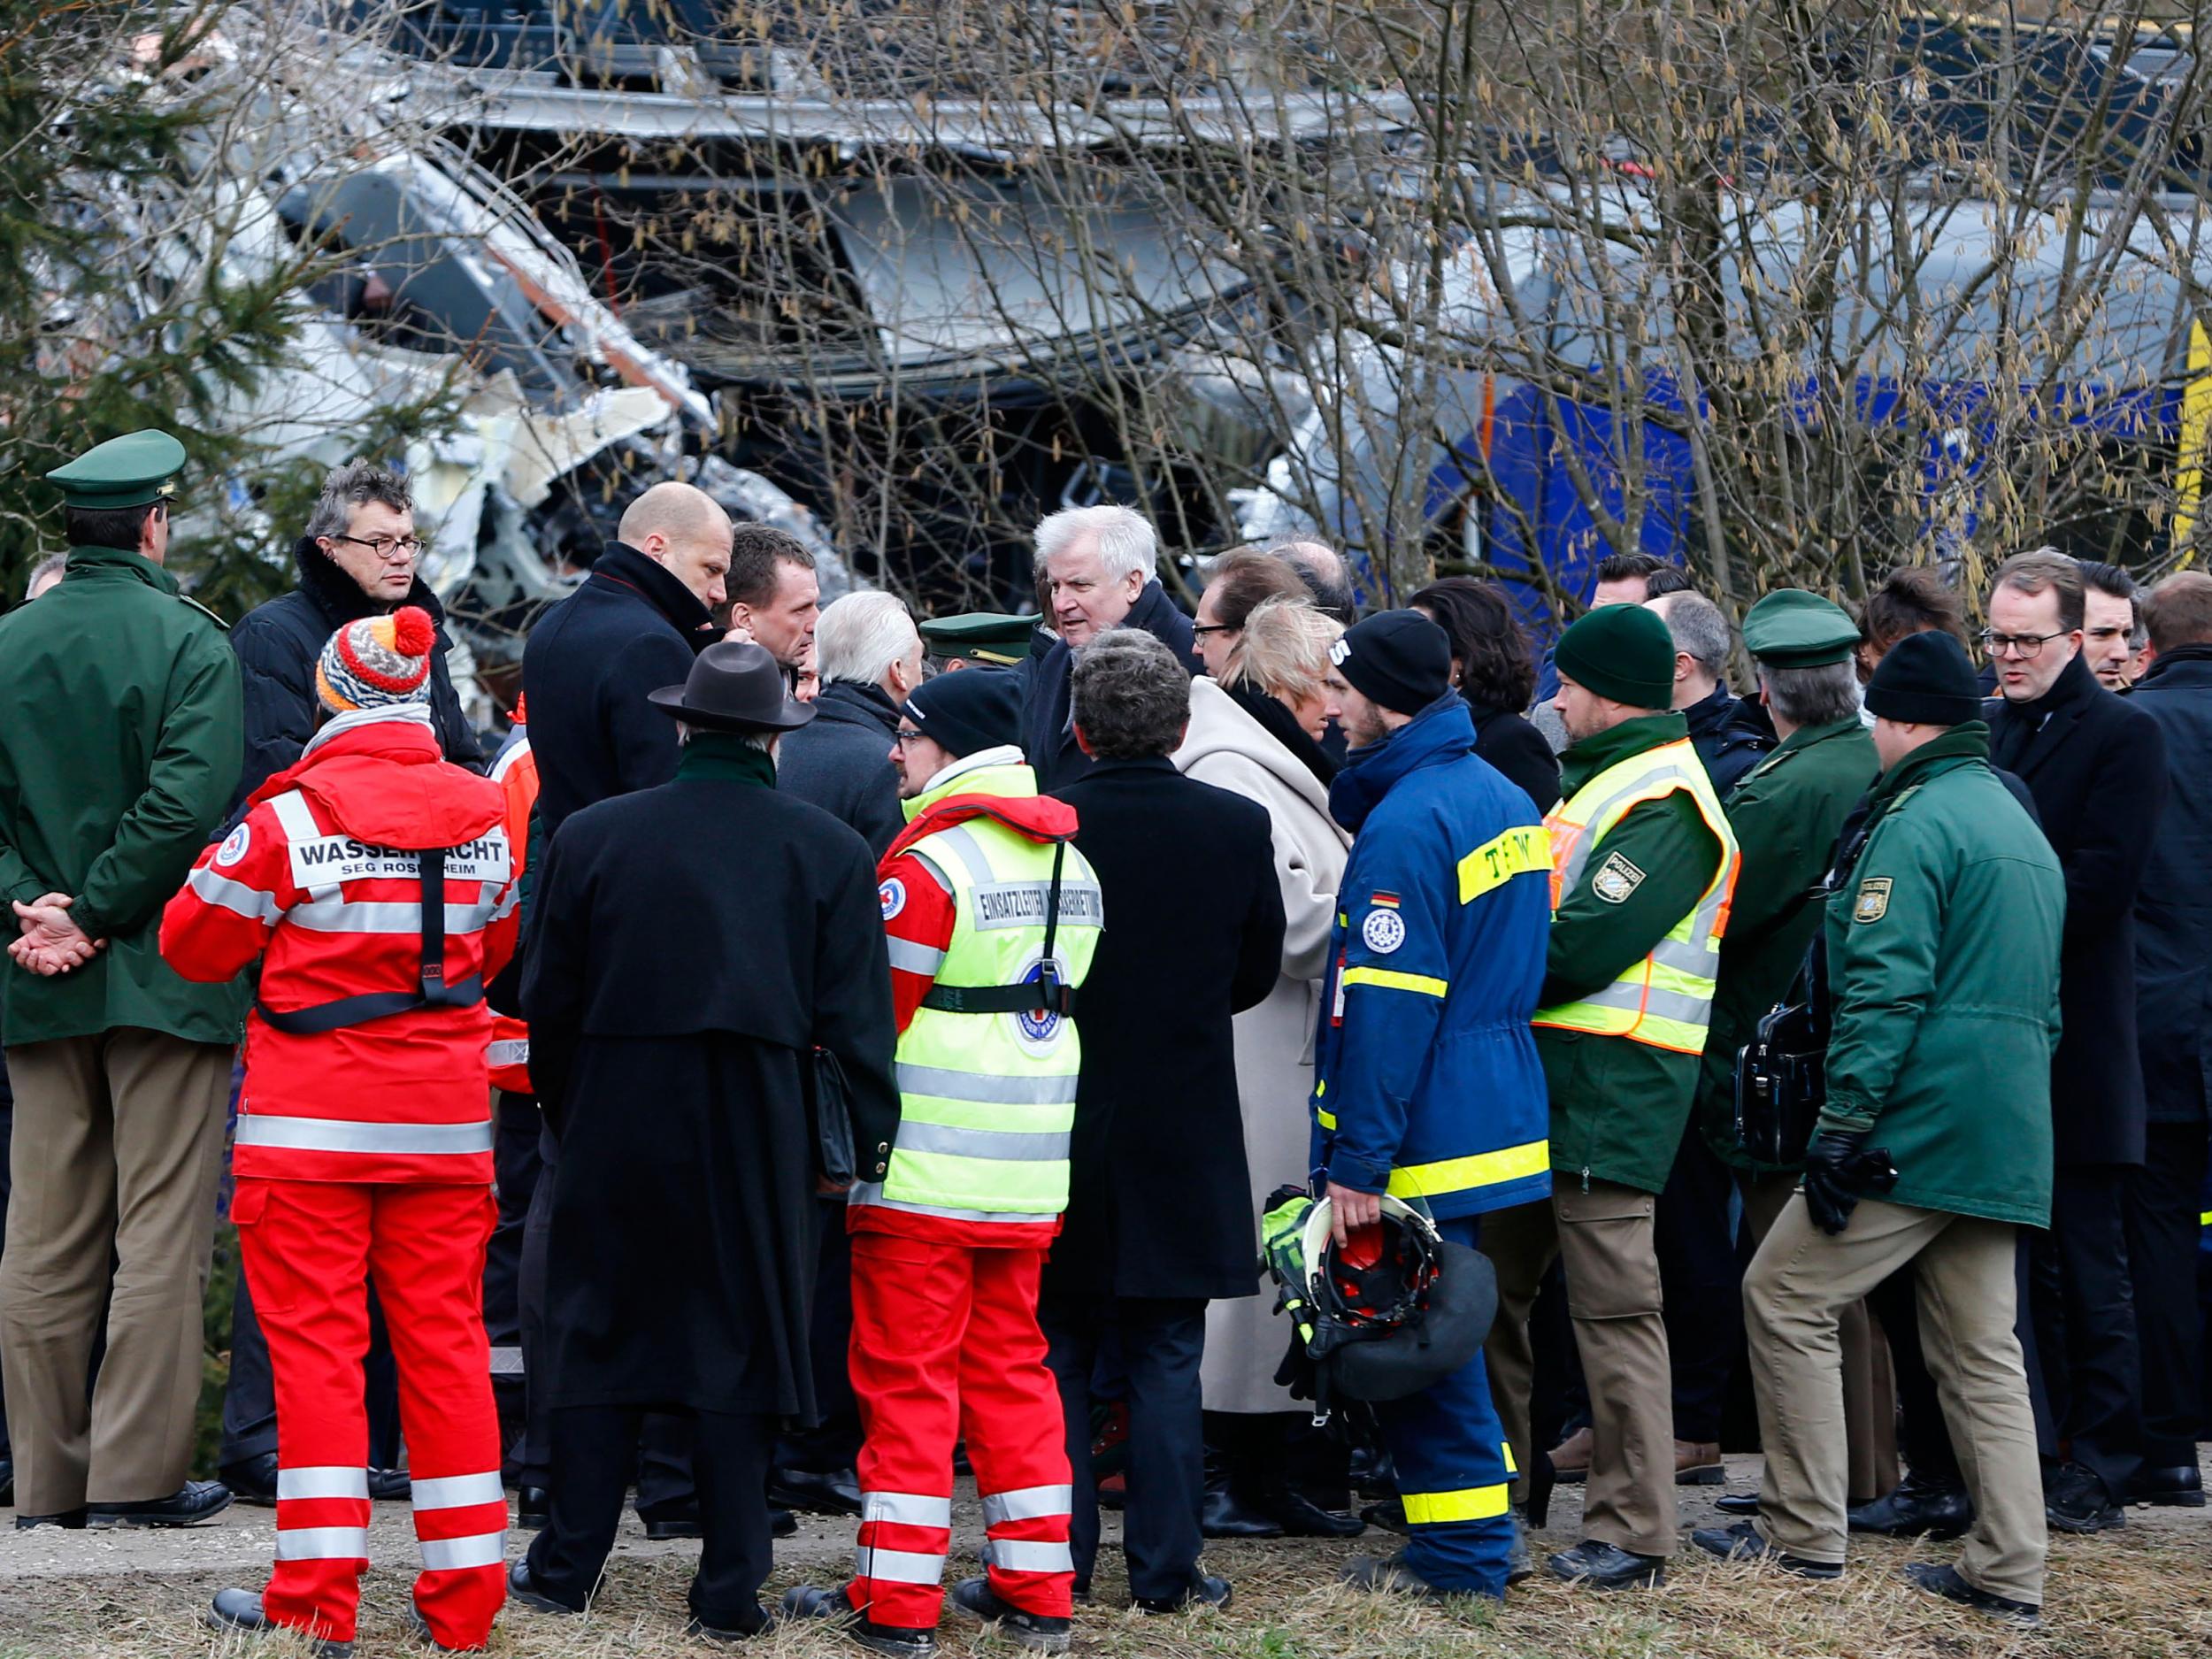 Bavarian state governor Horst Seehofer, center, arrives at the site where two trains collided head-on near Bad Aibling, Germany